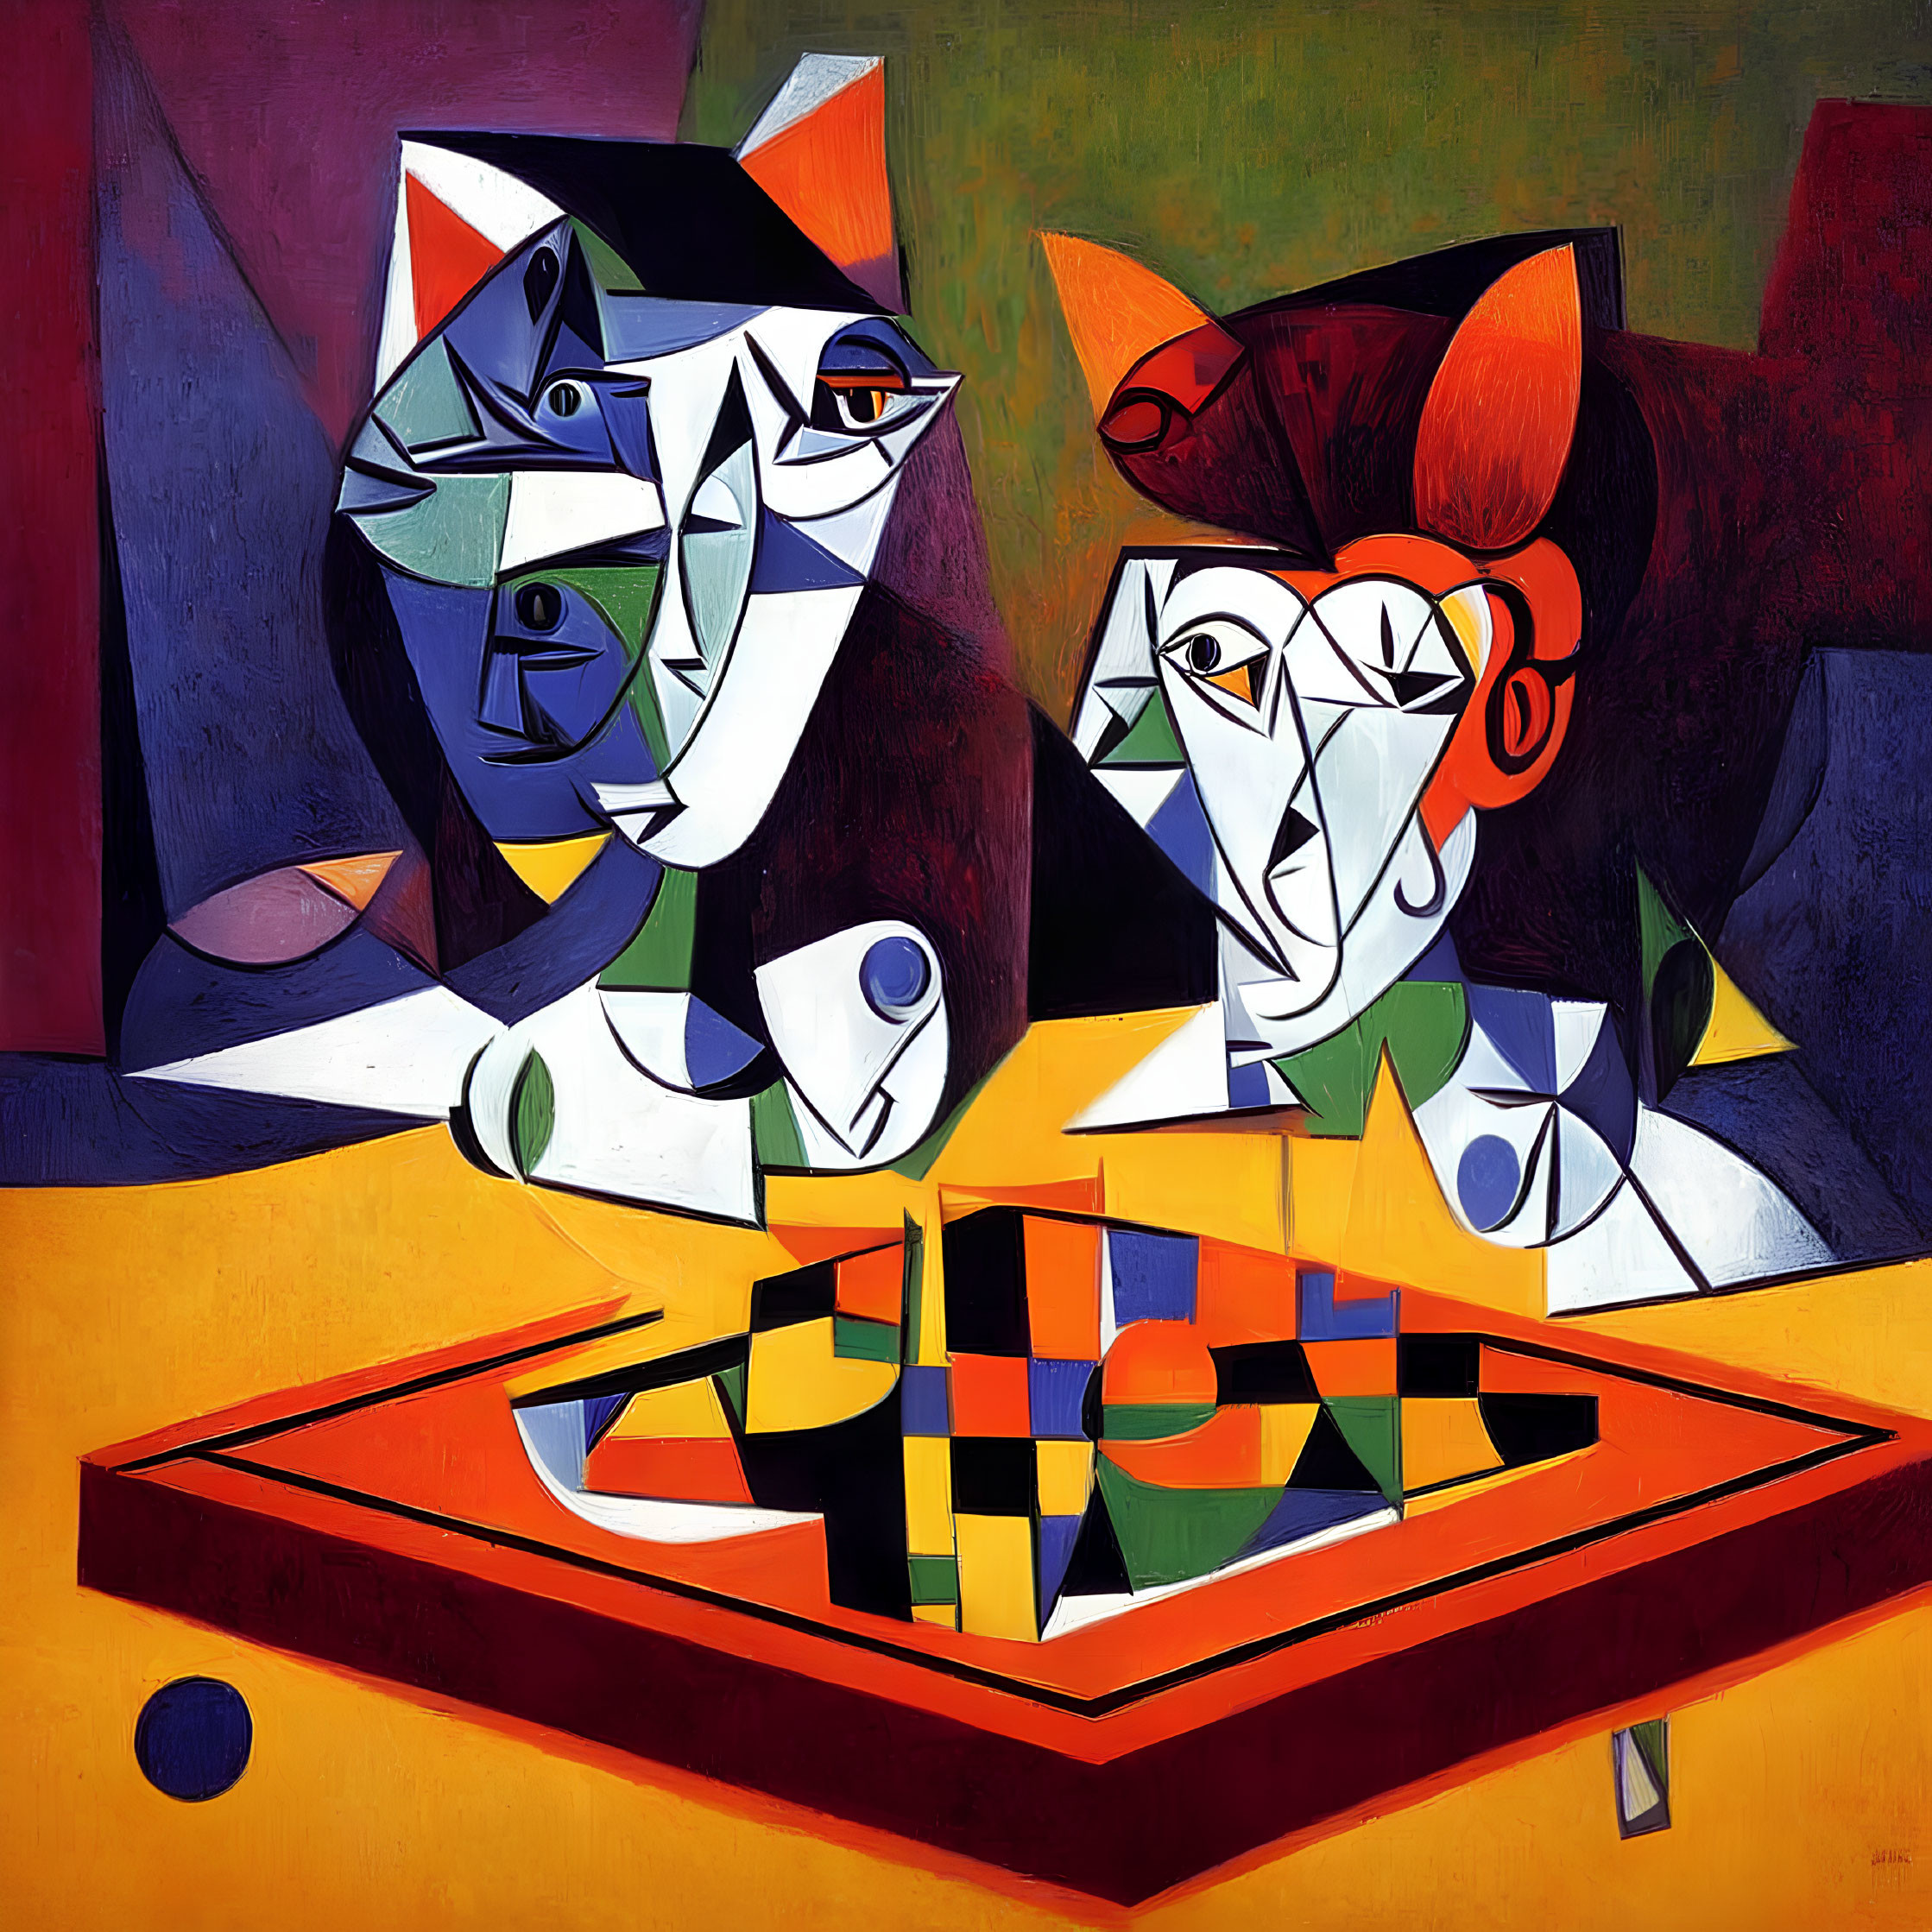 Colorful Cubist Painting with Multifaceted Figures & Geometric Shapes